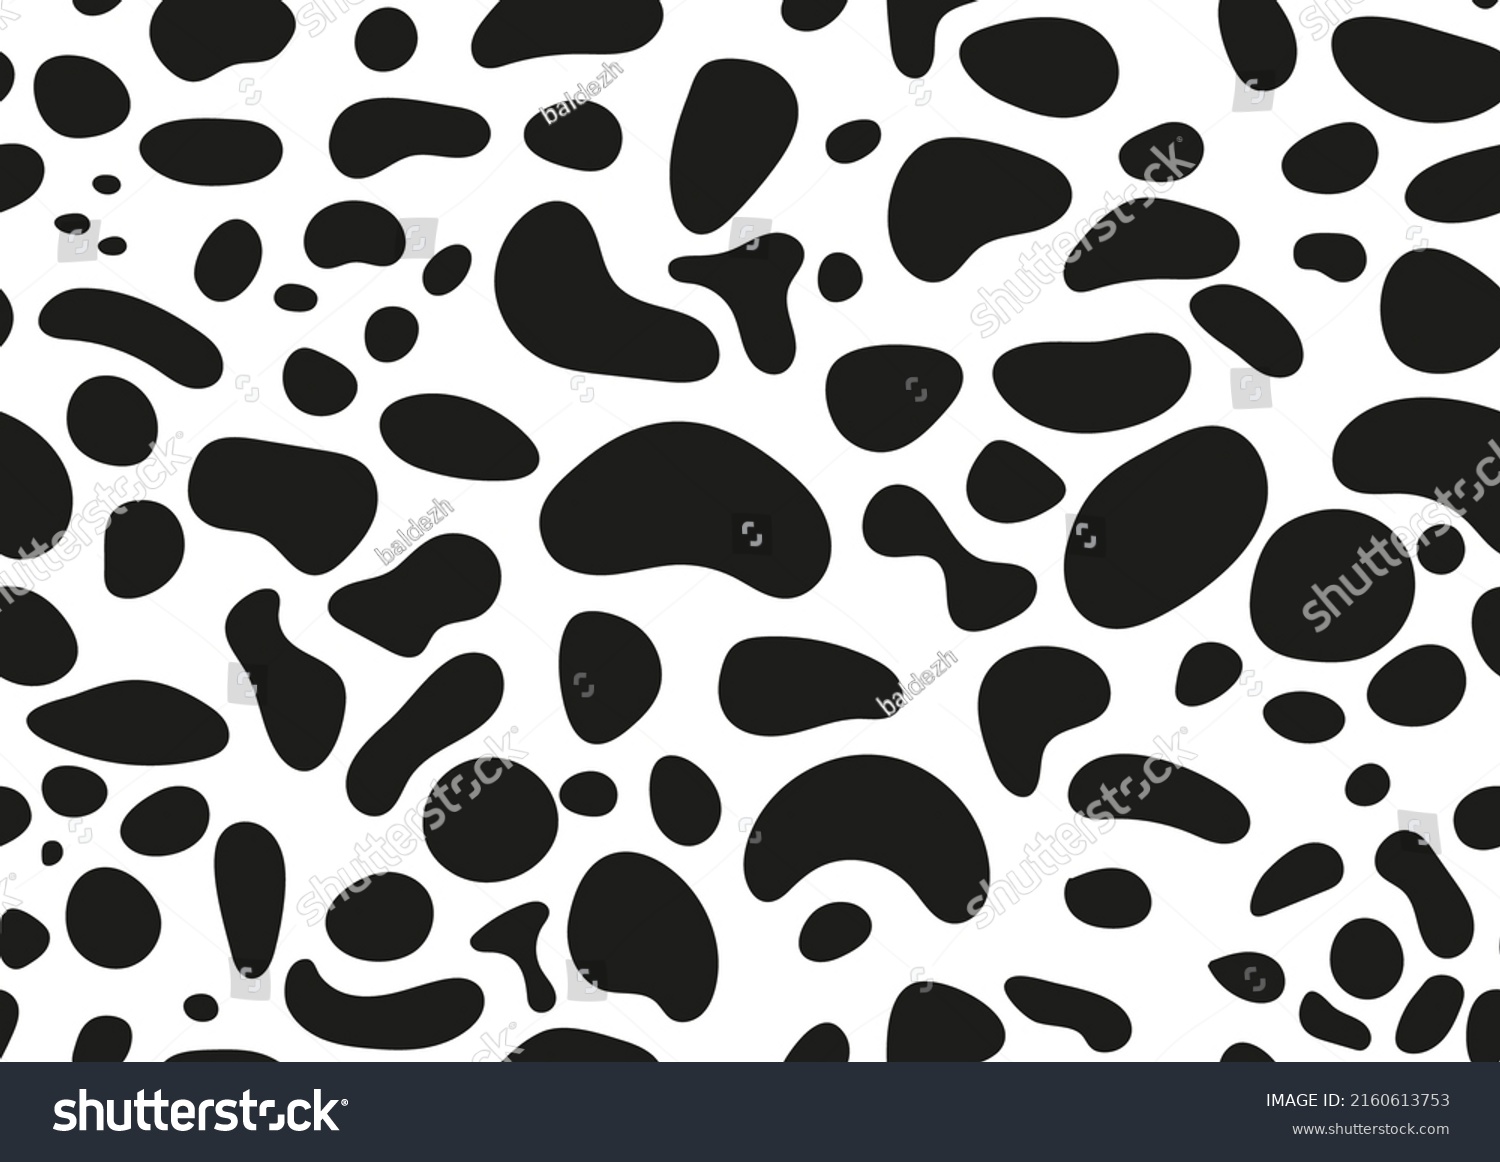 SVG of Dalmatian spot texture seamless pattern on skin. Absract animal print design - dog or cow black stains on white background for fibres and textile. Simple grain dalmation endless backdrop. svg